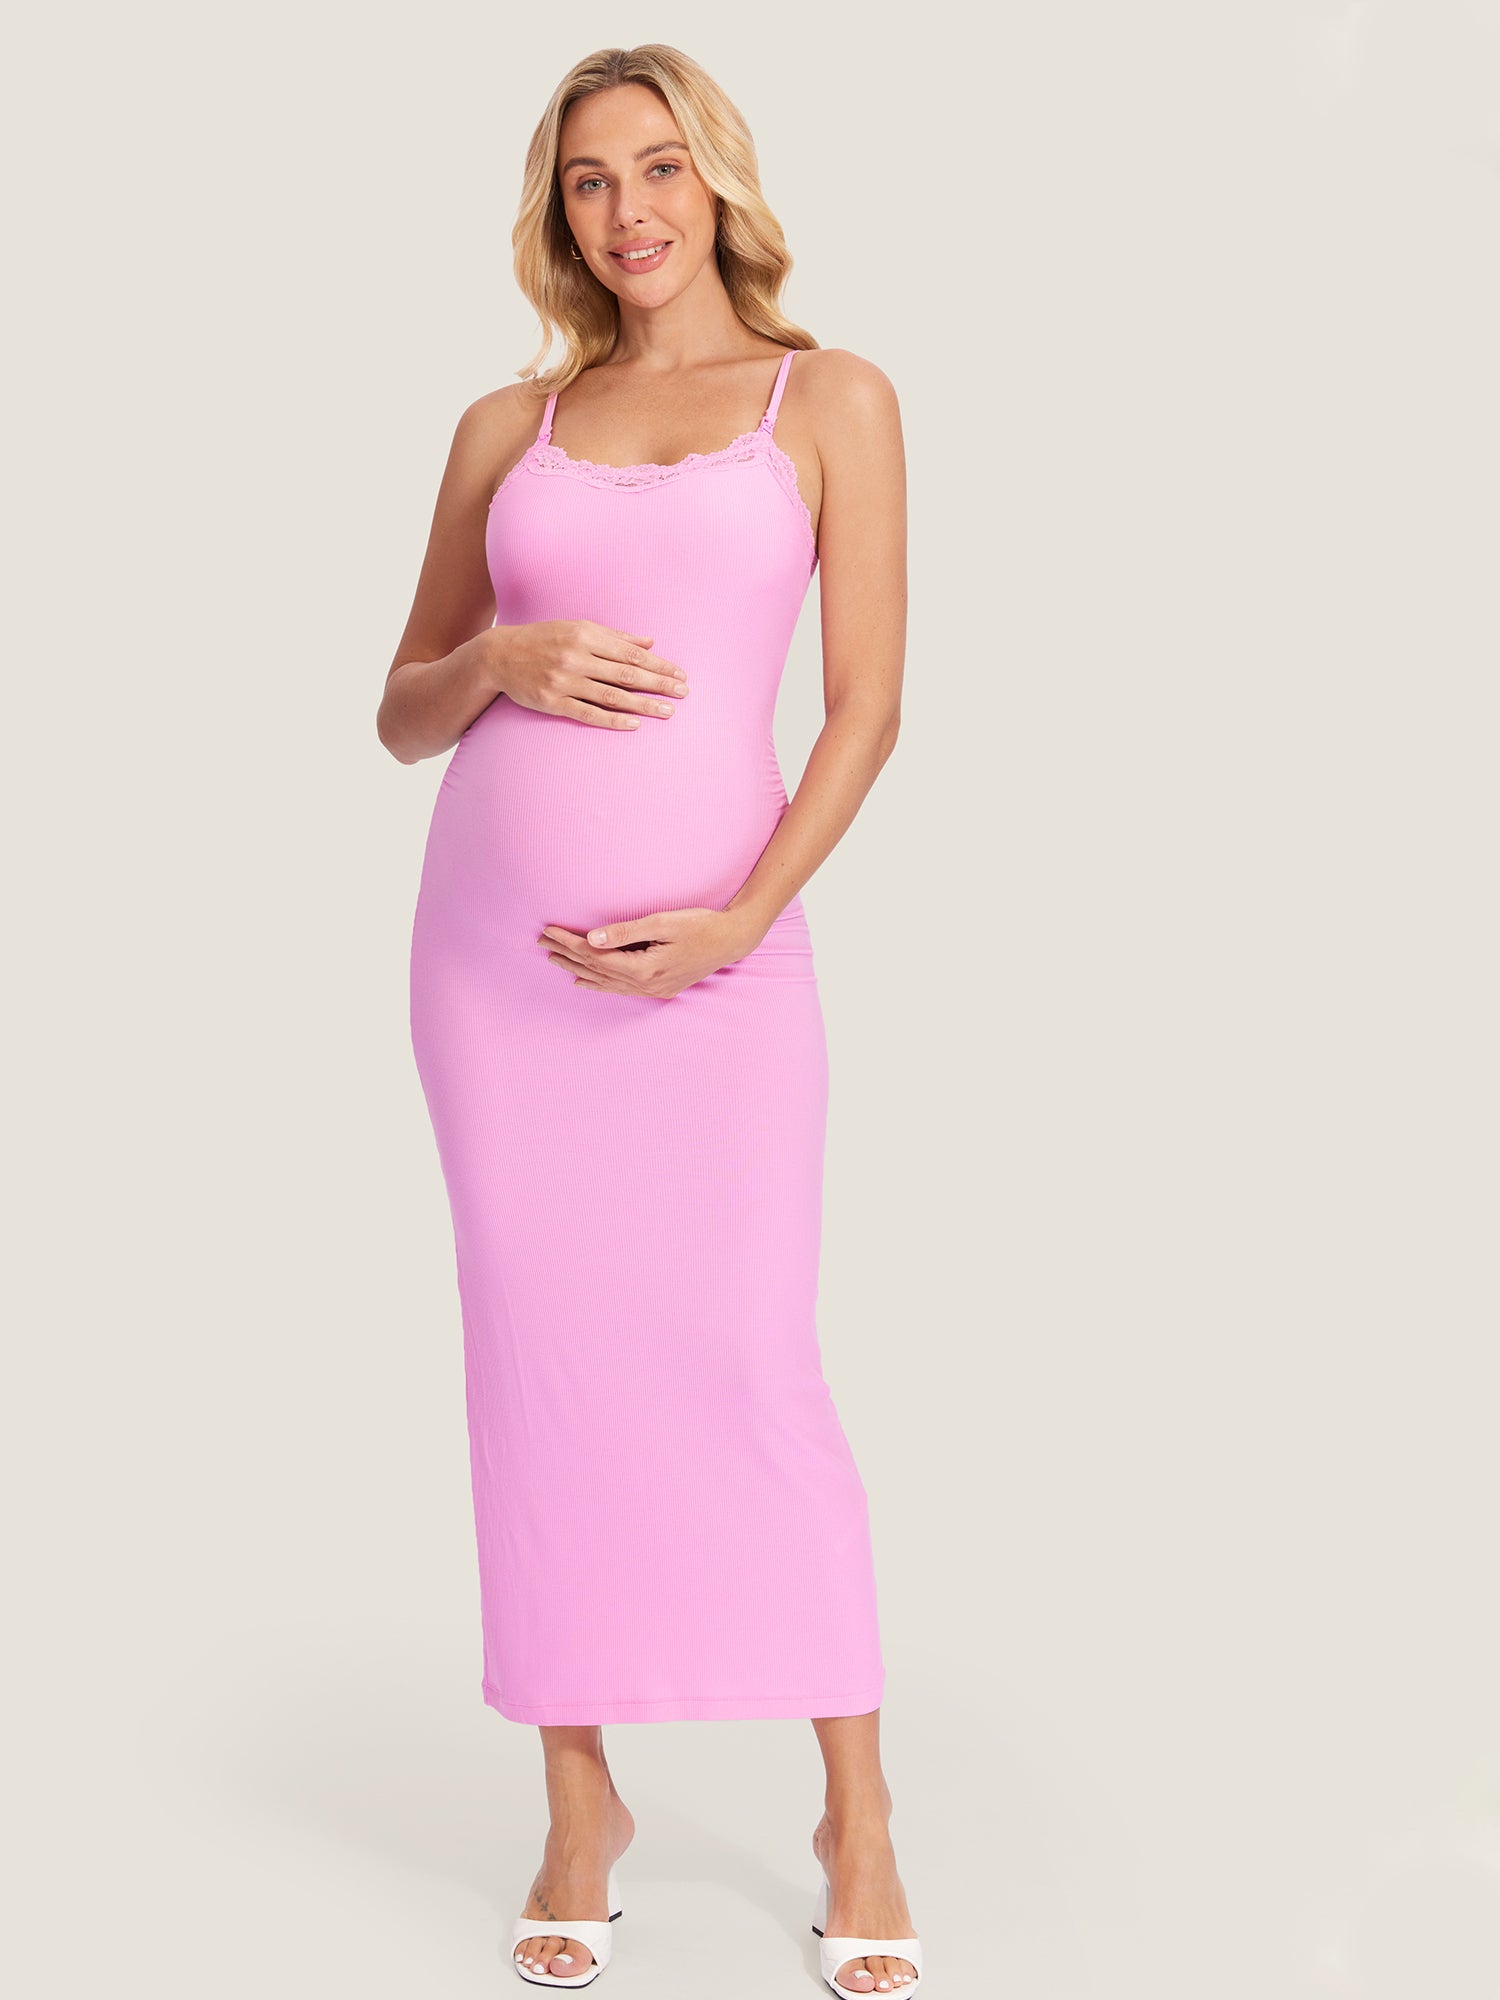 Lacy Ribbed Maternity & Nursing Dress Candy Pink